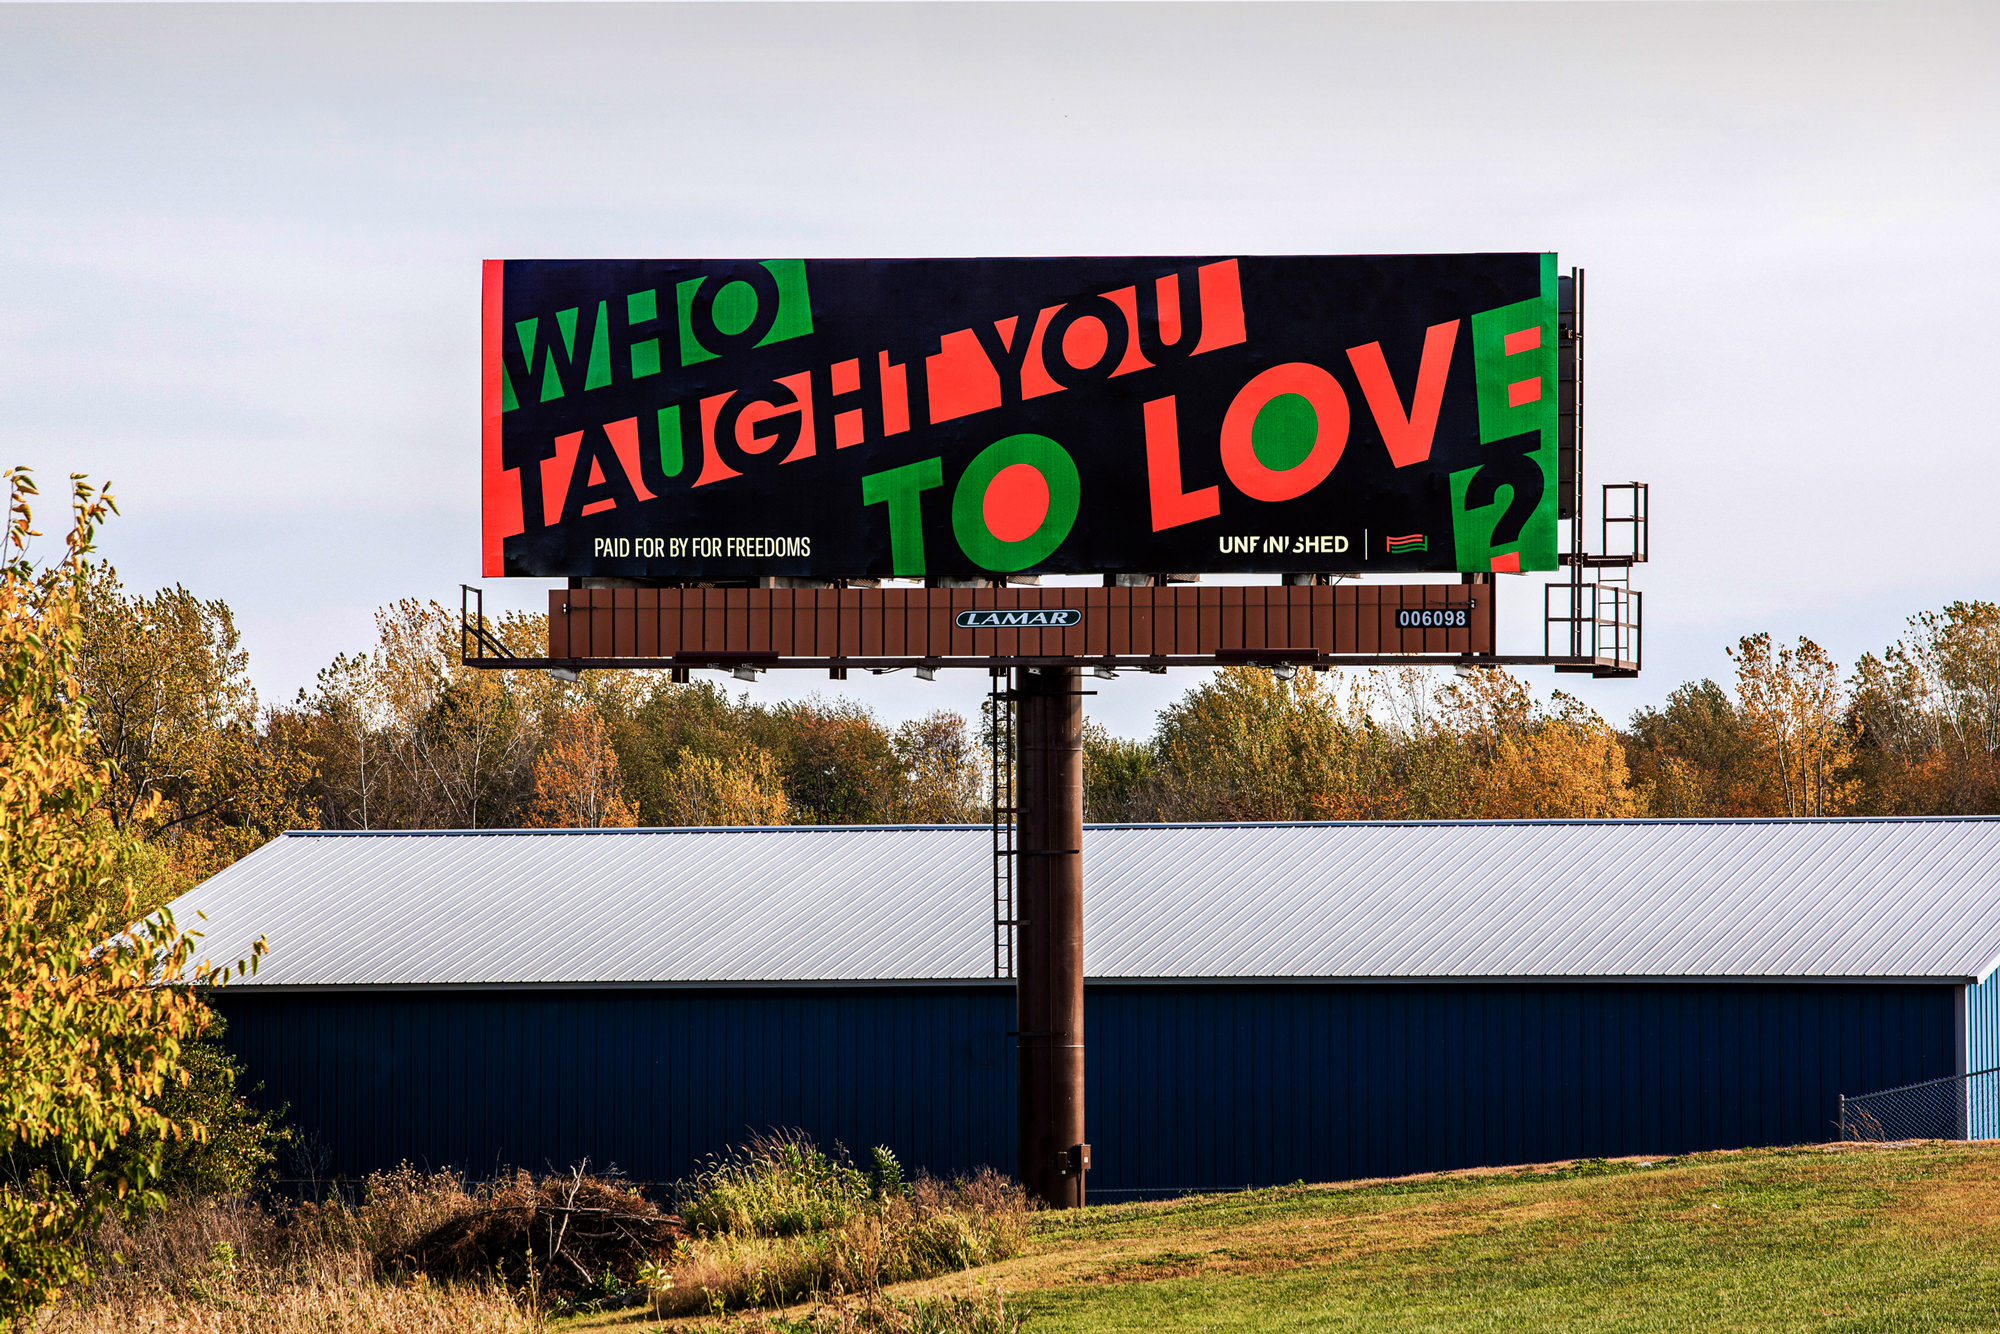 Image description: photograph of a billboard with the phrase “Who taught you to love?” in a rural, green environment. “Who Taught You to Love?” 2020 By Hank Willis Thomas, originally exhibited as part of For Freedoms’ national billboard campaign. Designed by: Sam Shmith. Photographed by: Jeff Scroggins